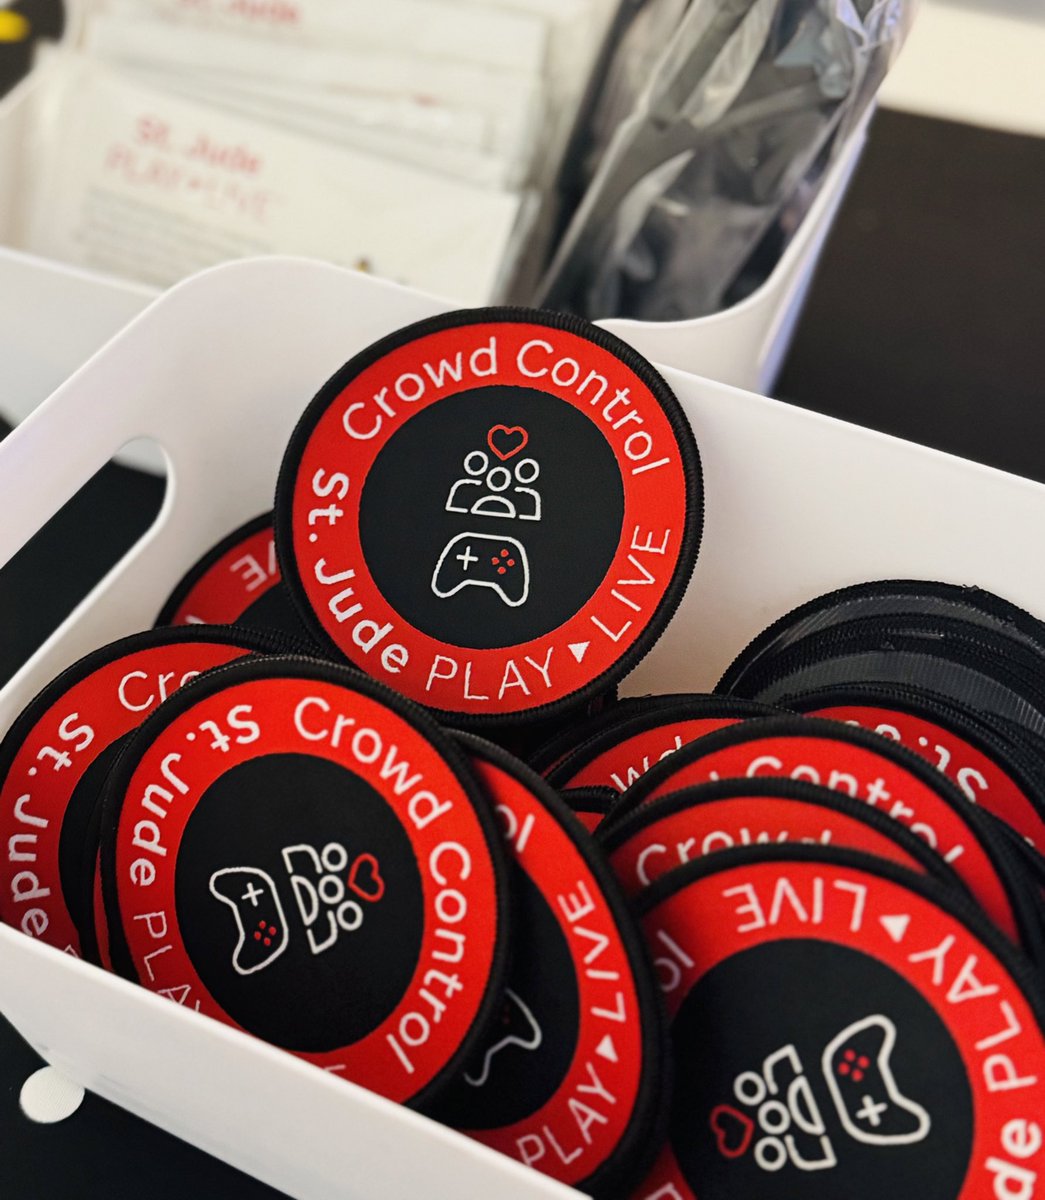 It’s Day 3 of #TwitchCon! ❤️ And our friends at @StJudePLAYLIVE have some Crowd Control patches to give out at their booth in the Charity Zone! If you’ve ever fundraised for St. Jude with CC you should stop by to get yours!